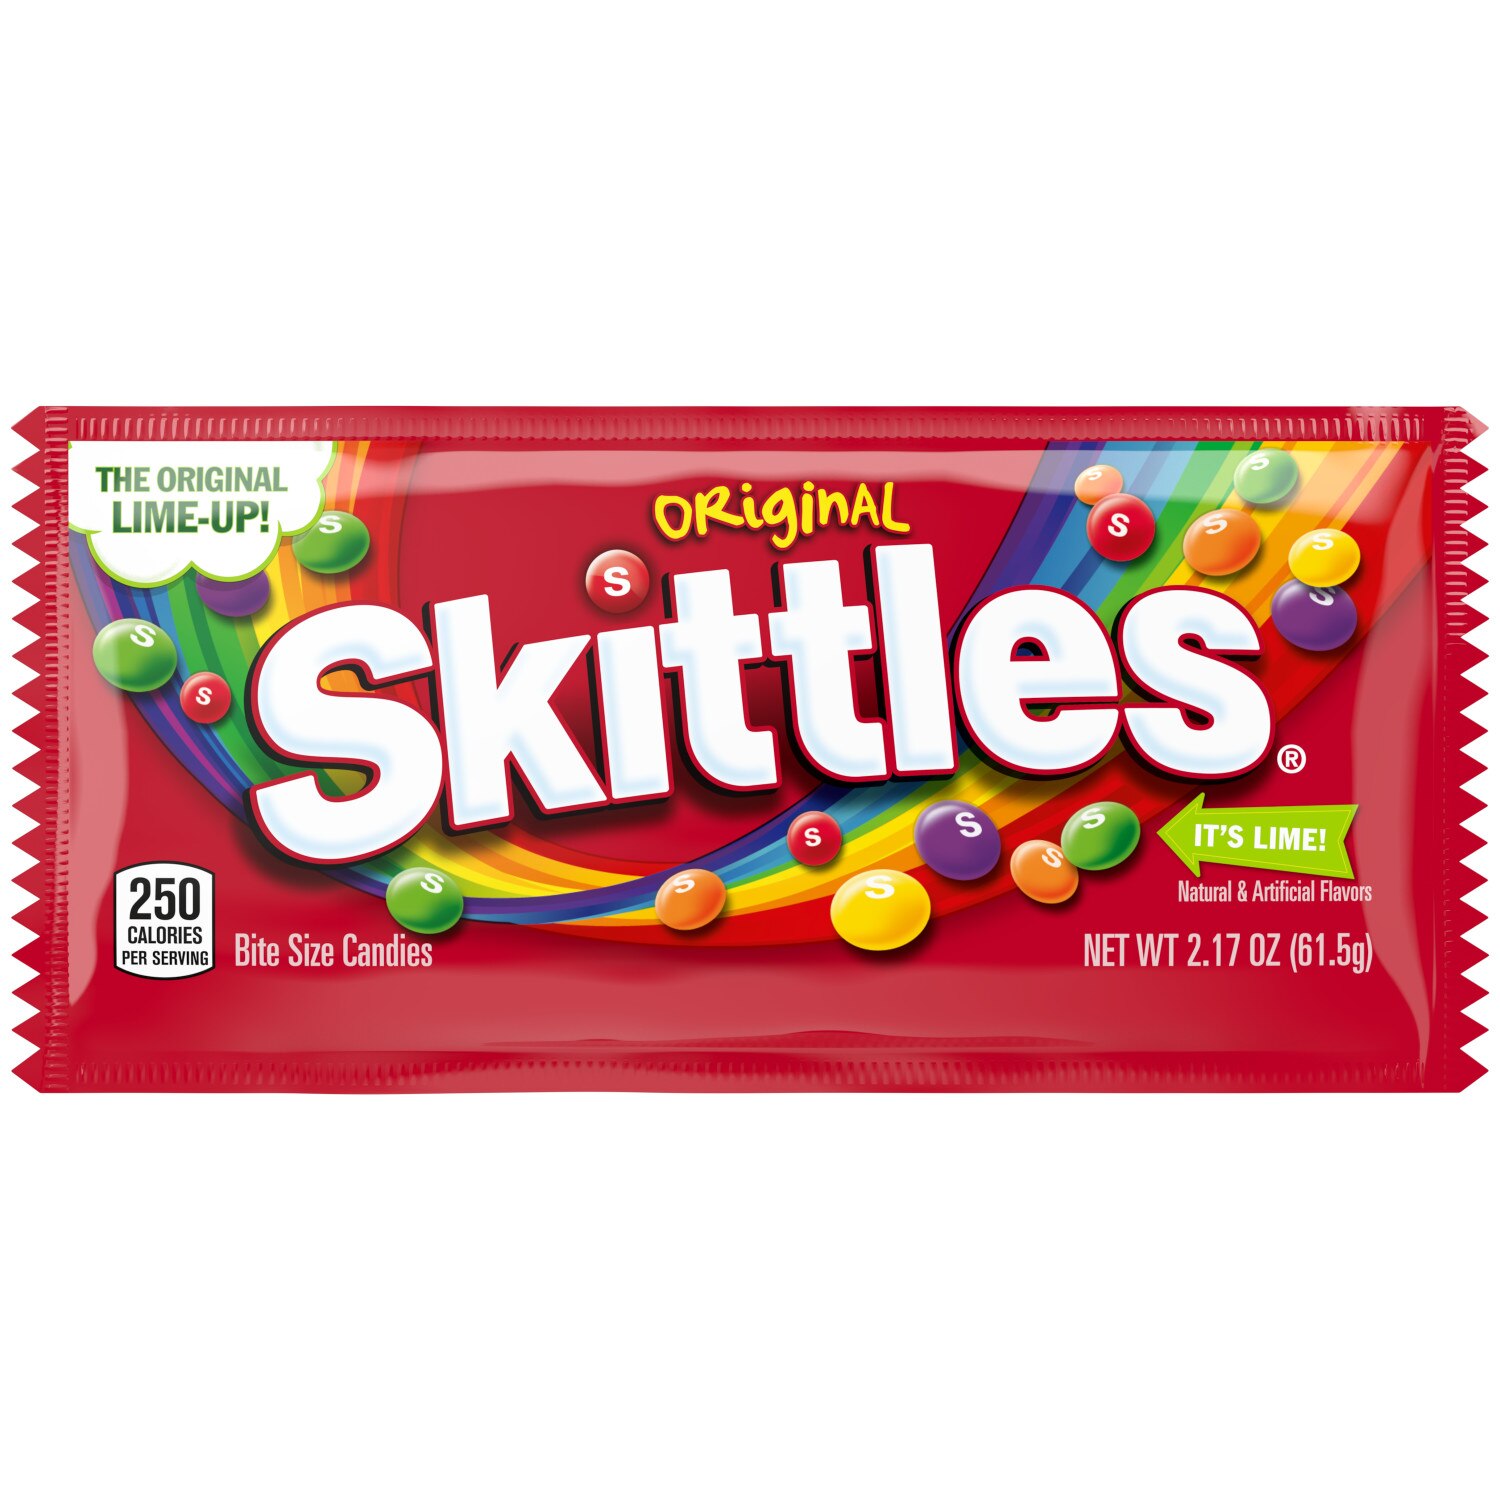 SKITTLES Original Chewy Candy, Full Size, 2.17 oz Bag